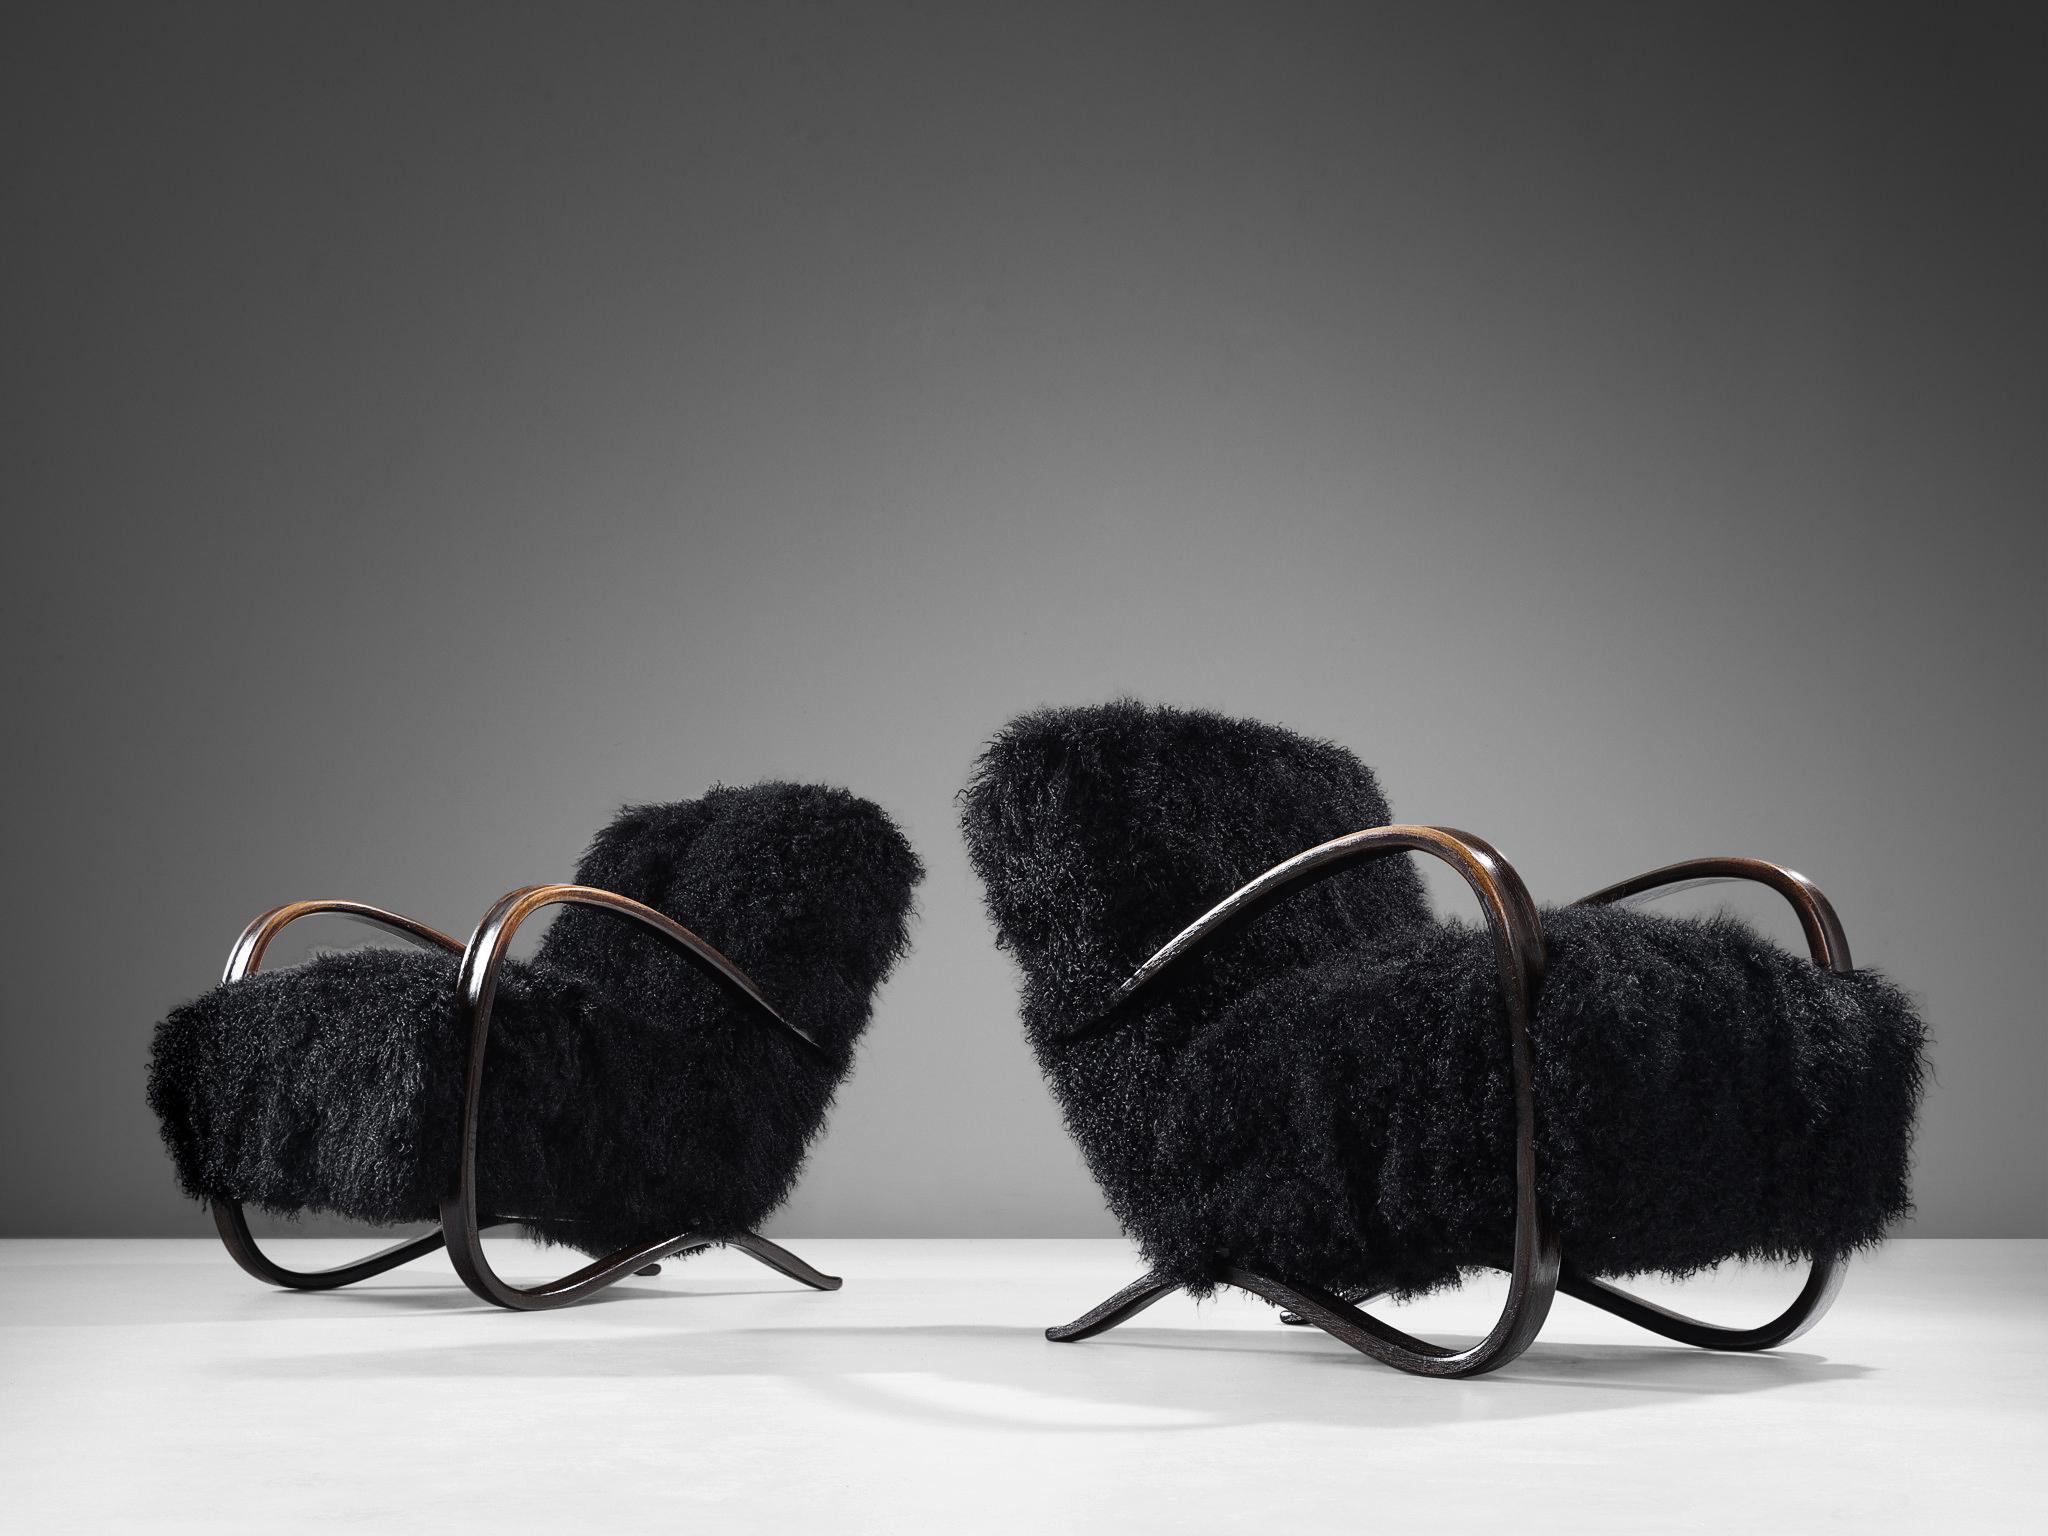 Jindrich Halabala, lounge chairs, model 'H269', stained beech, Tibetan lambswool, Czech Republic, 1930s.

Extraordinary easy chairs in black Tibetan lambswool upholstery. These chairs have a very dynamic and abundant appearance and the fuzzy